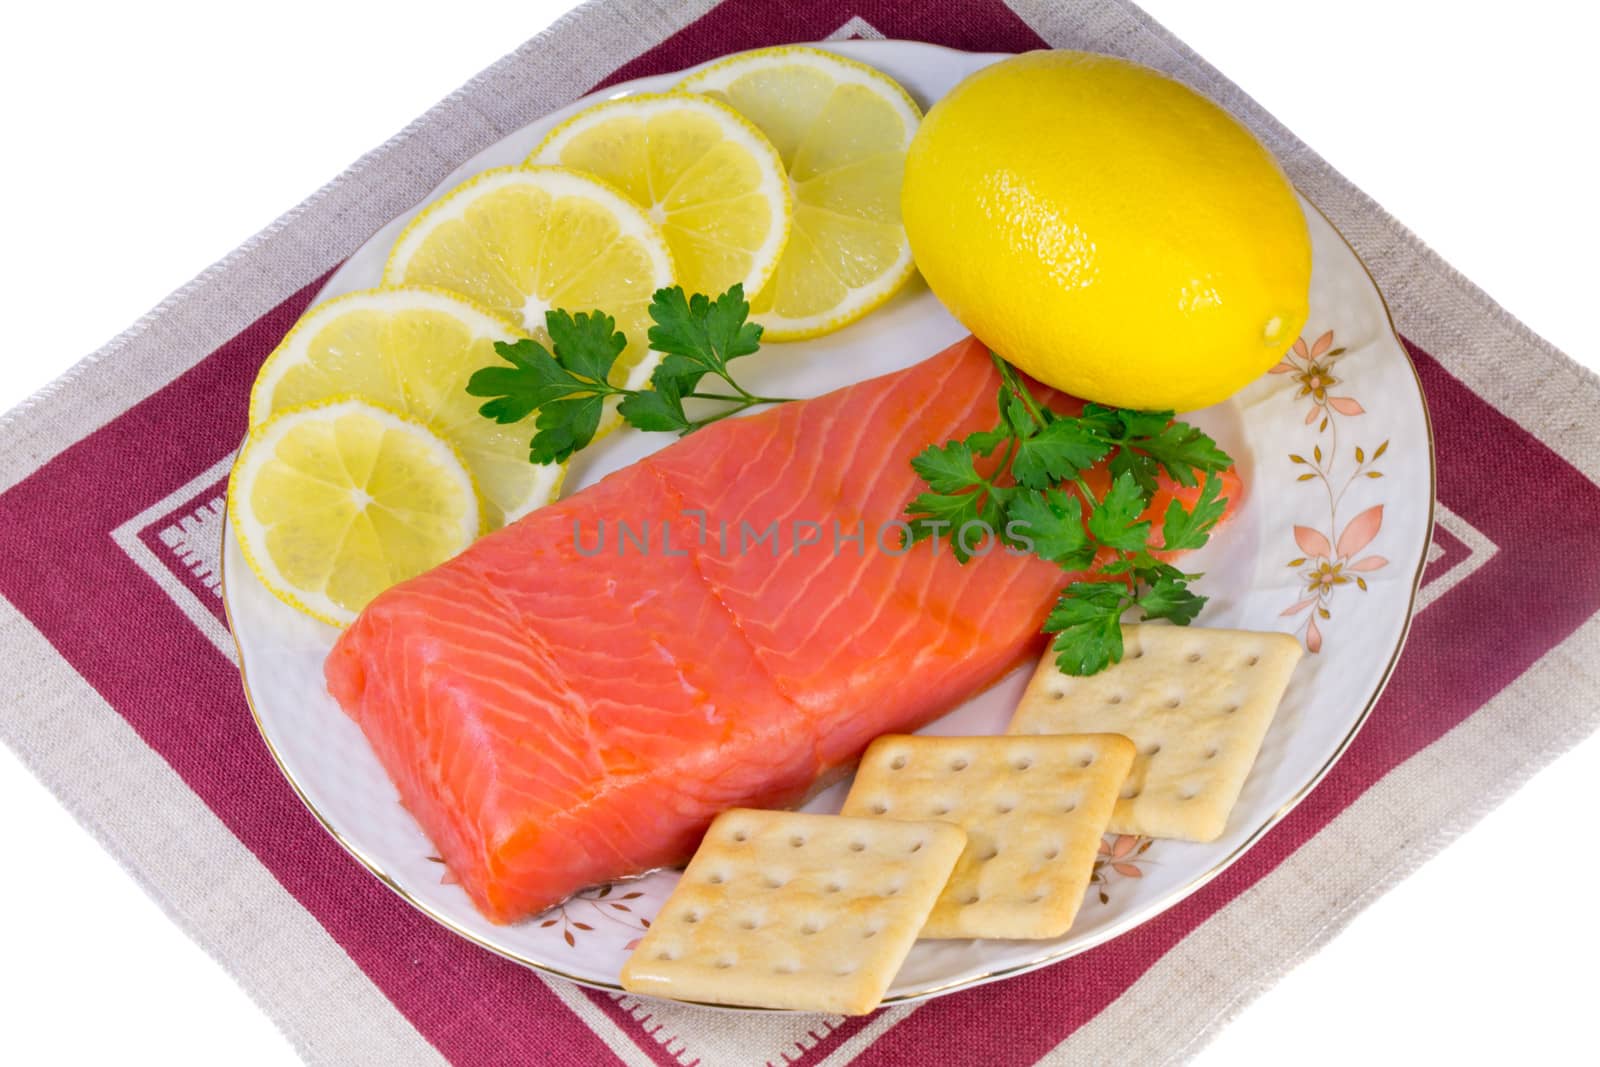 Salmon fillet and lemons on a platter on a white background. by georgina198